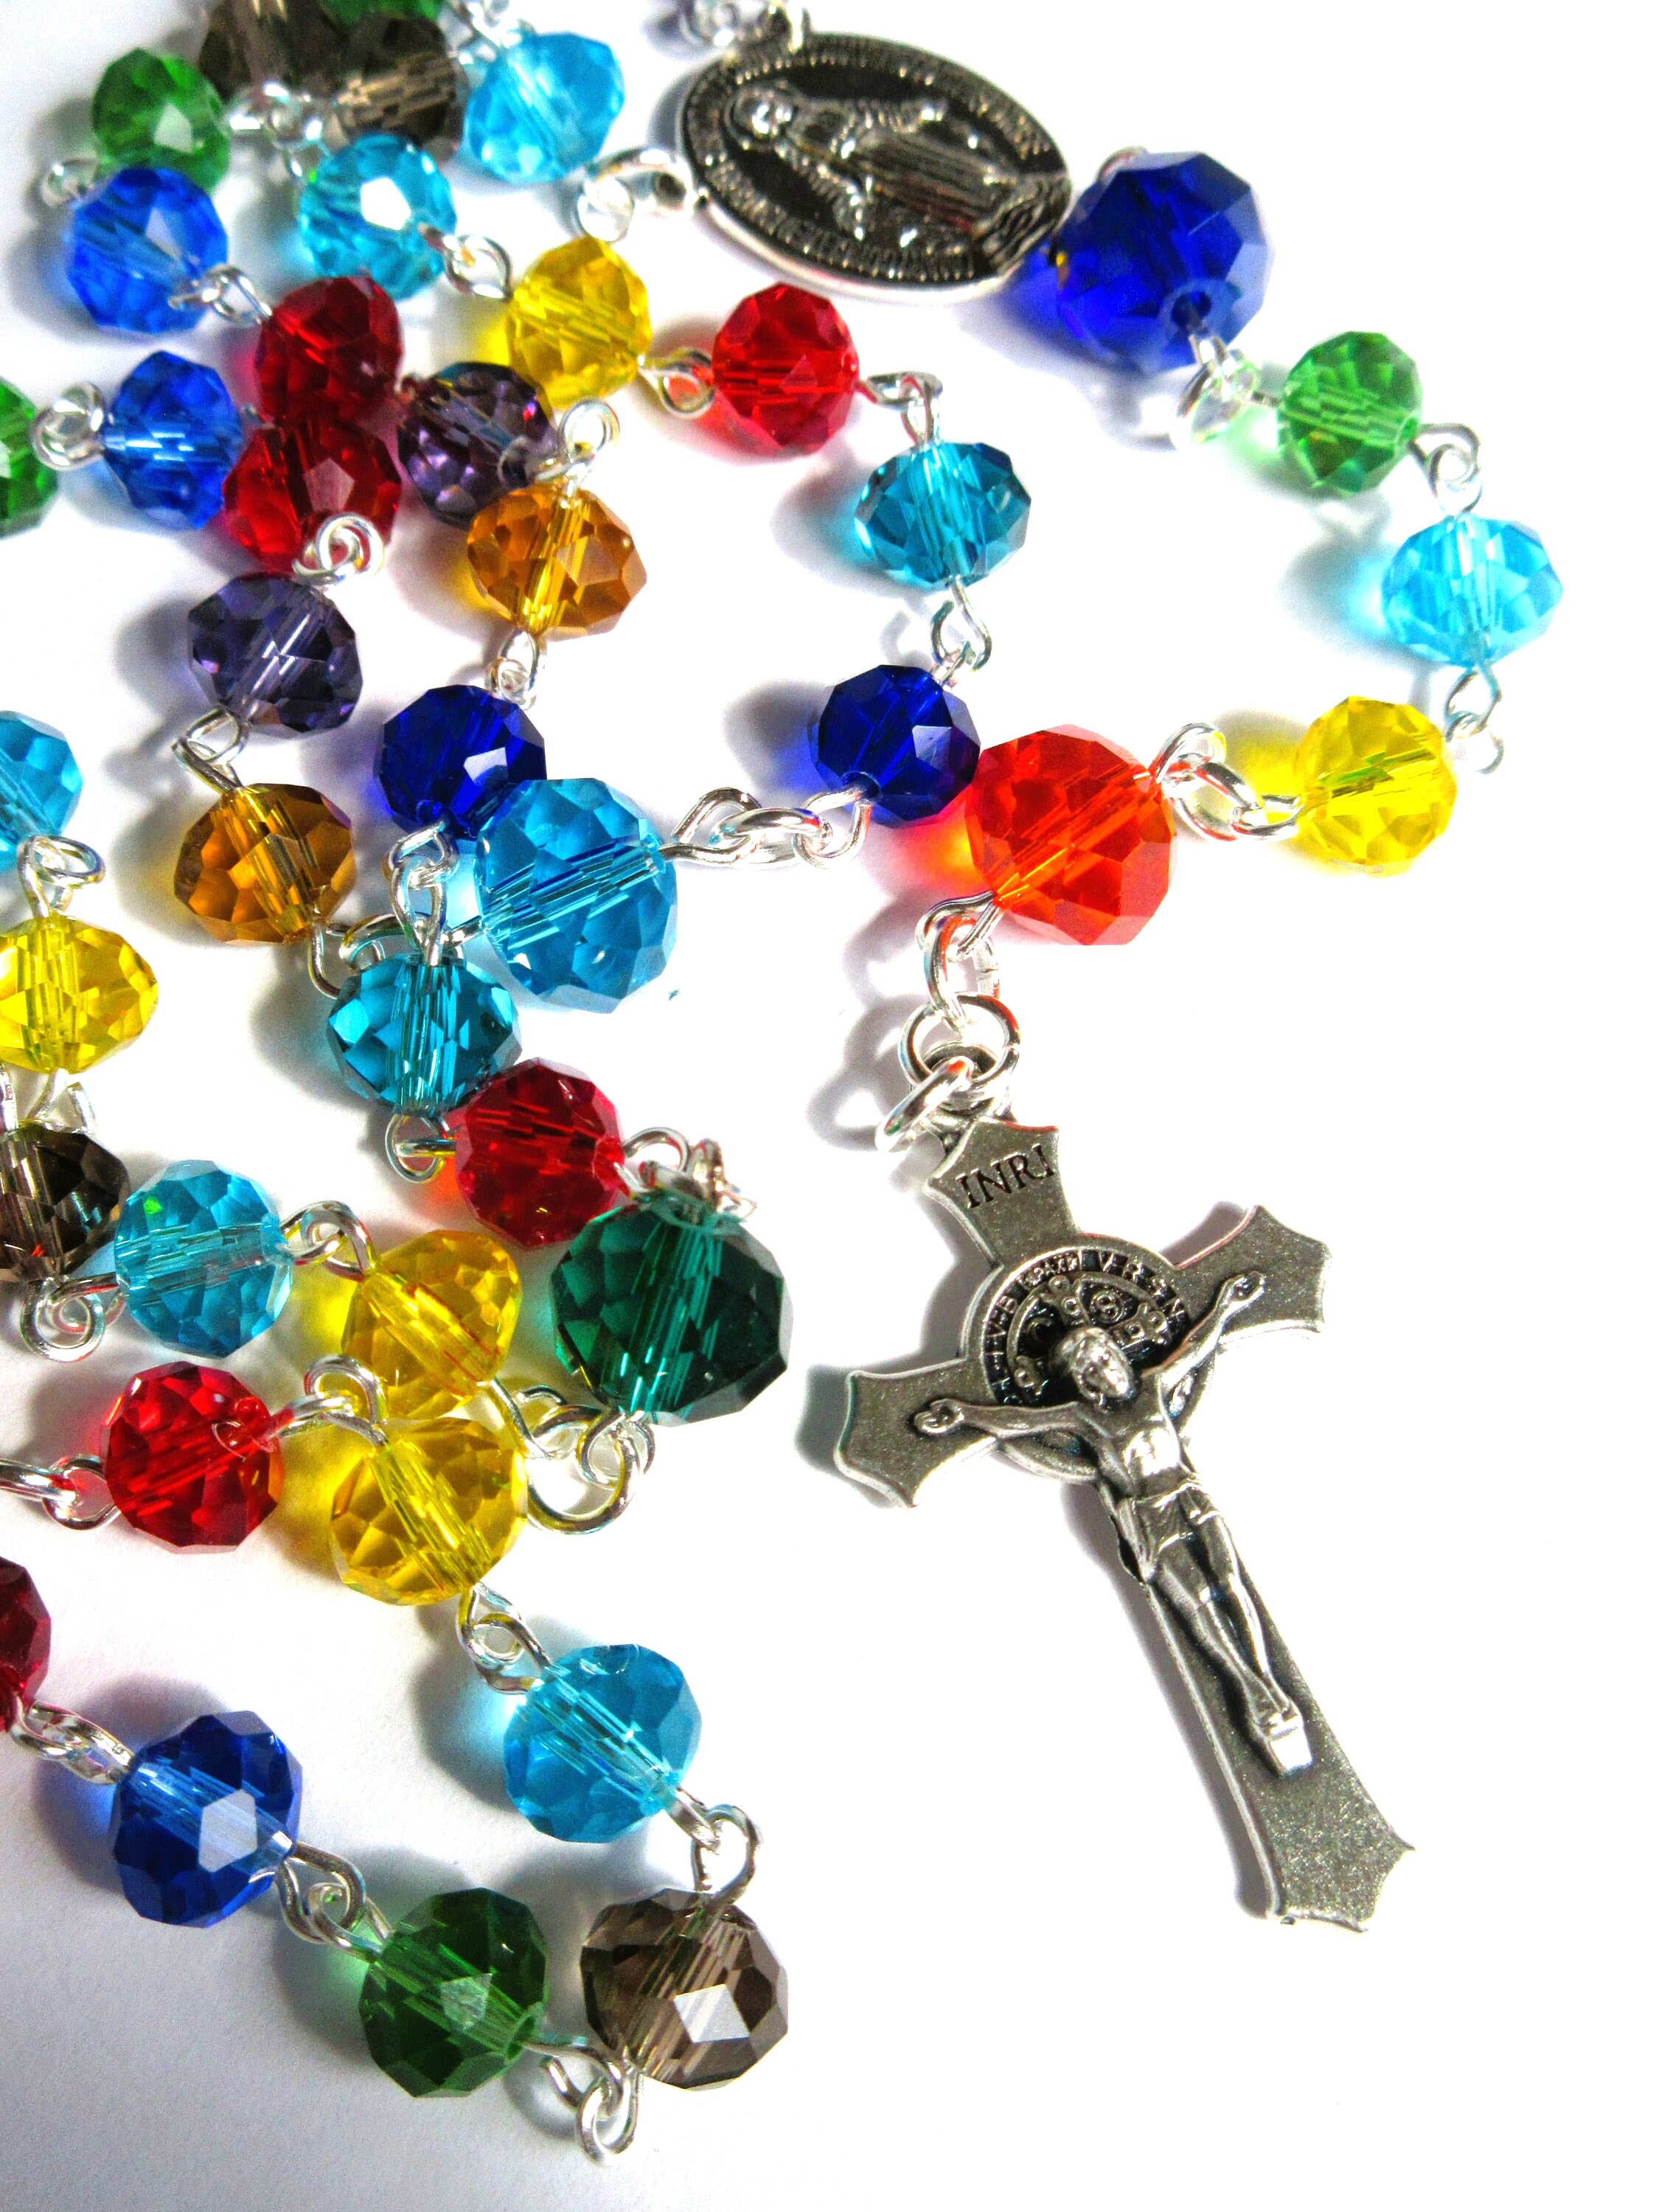 Cerulean Glass Pearl Beaded Rosary Making Kit